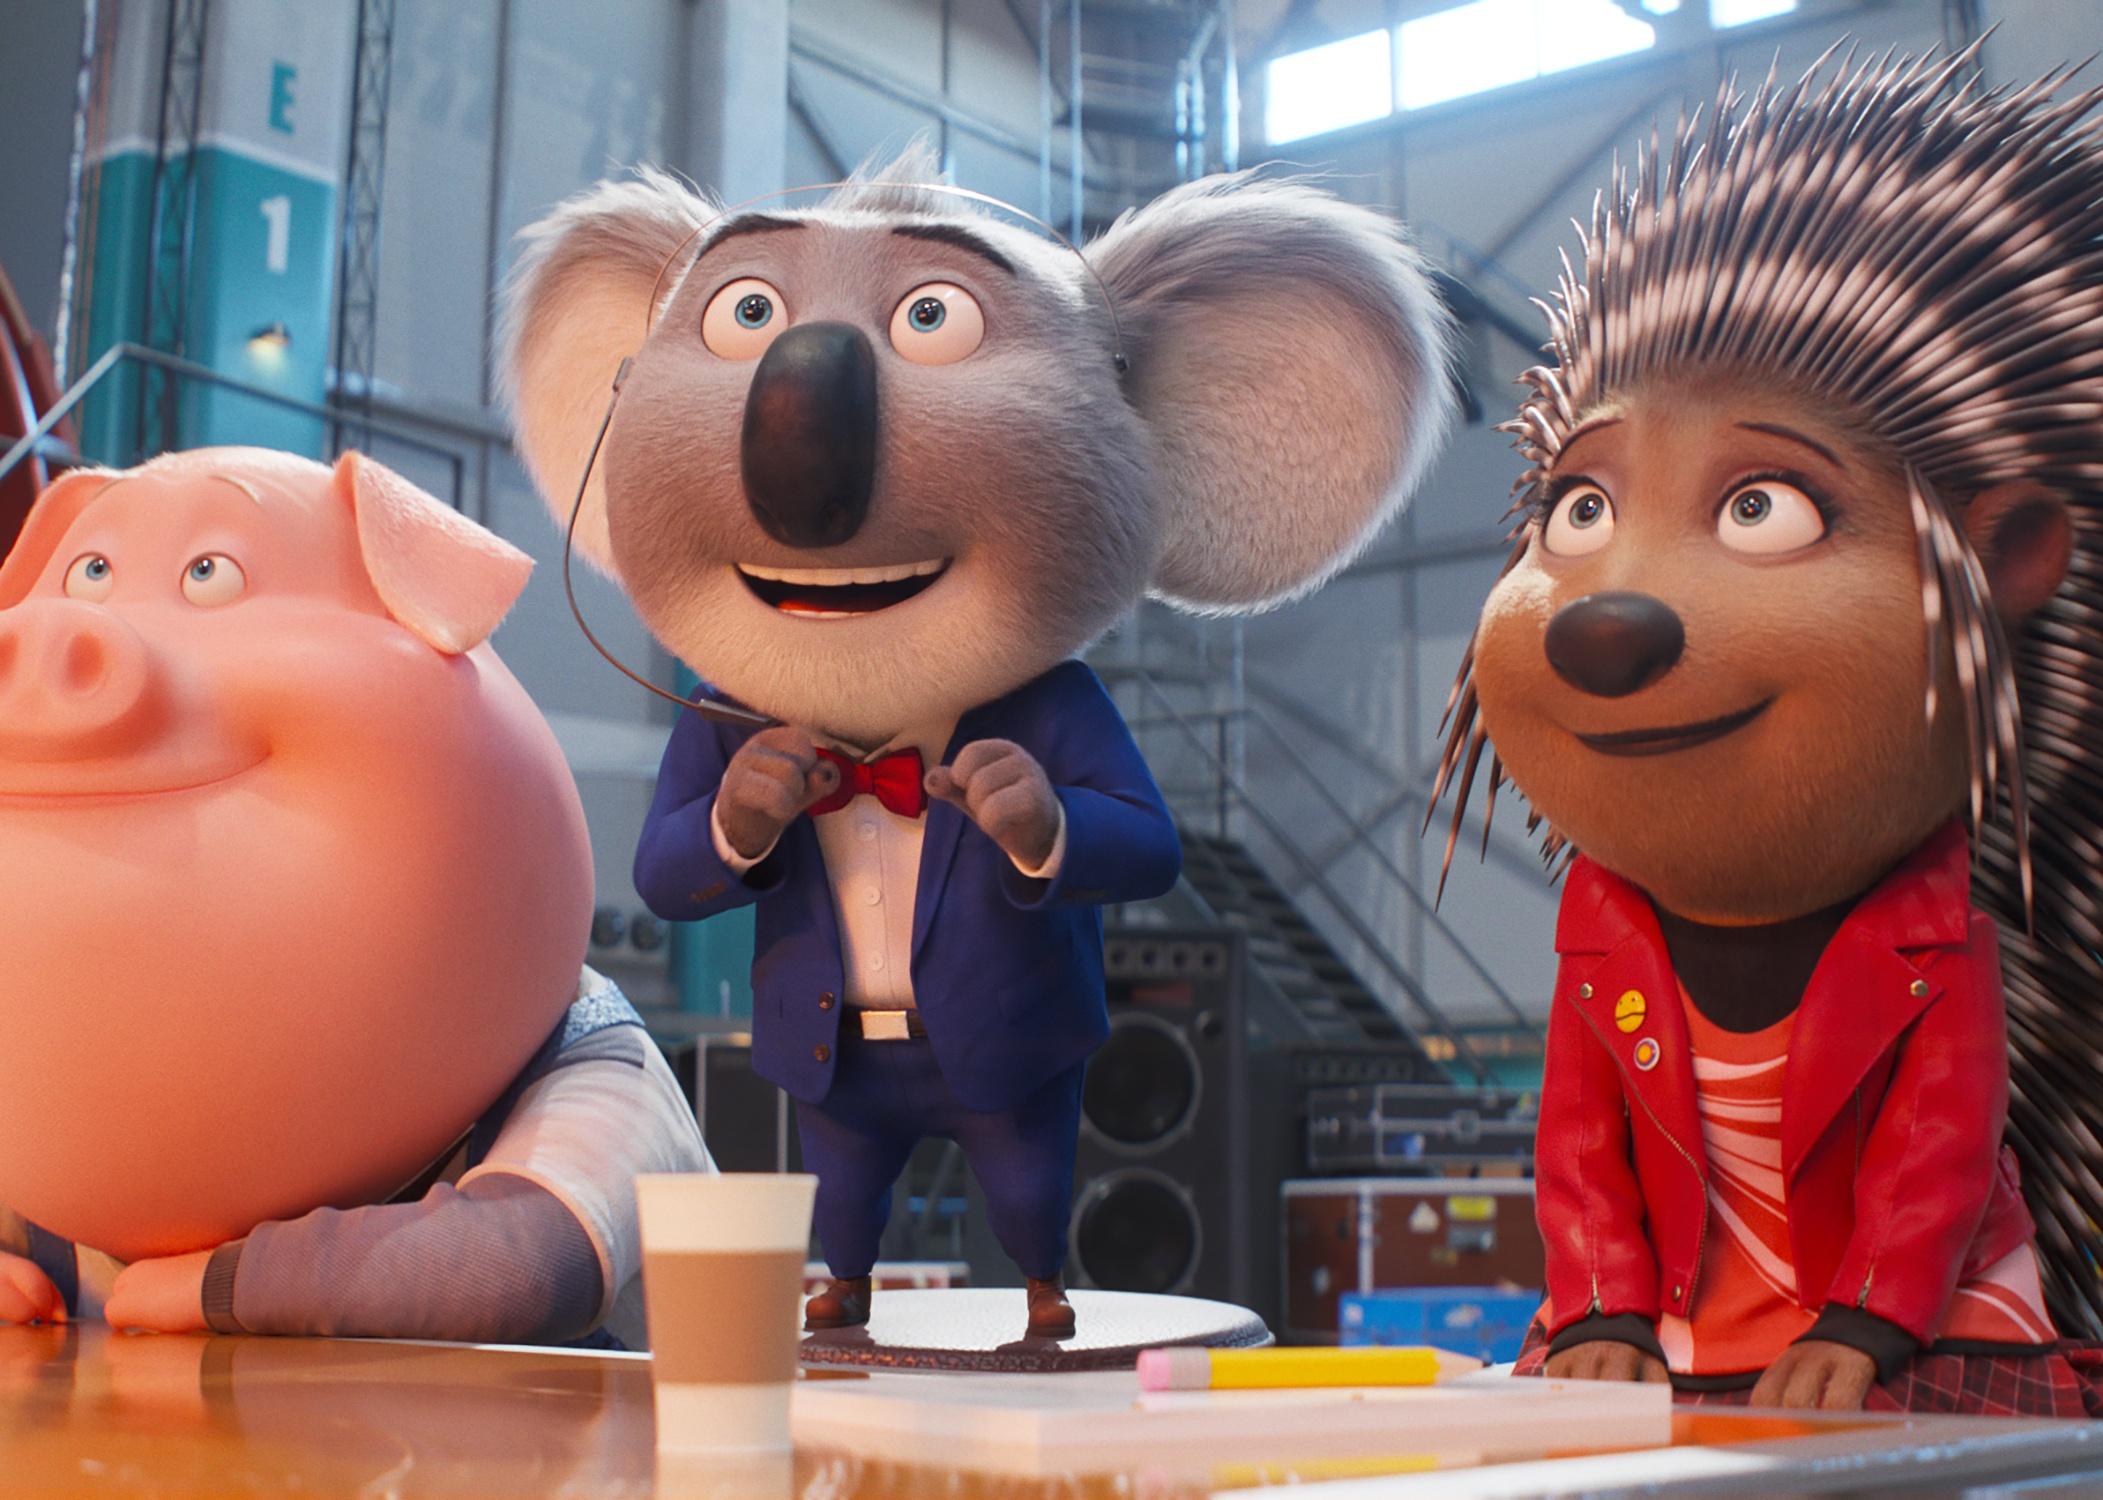 An animation of a pig, koala and a porcupine at a table watching someone perform.